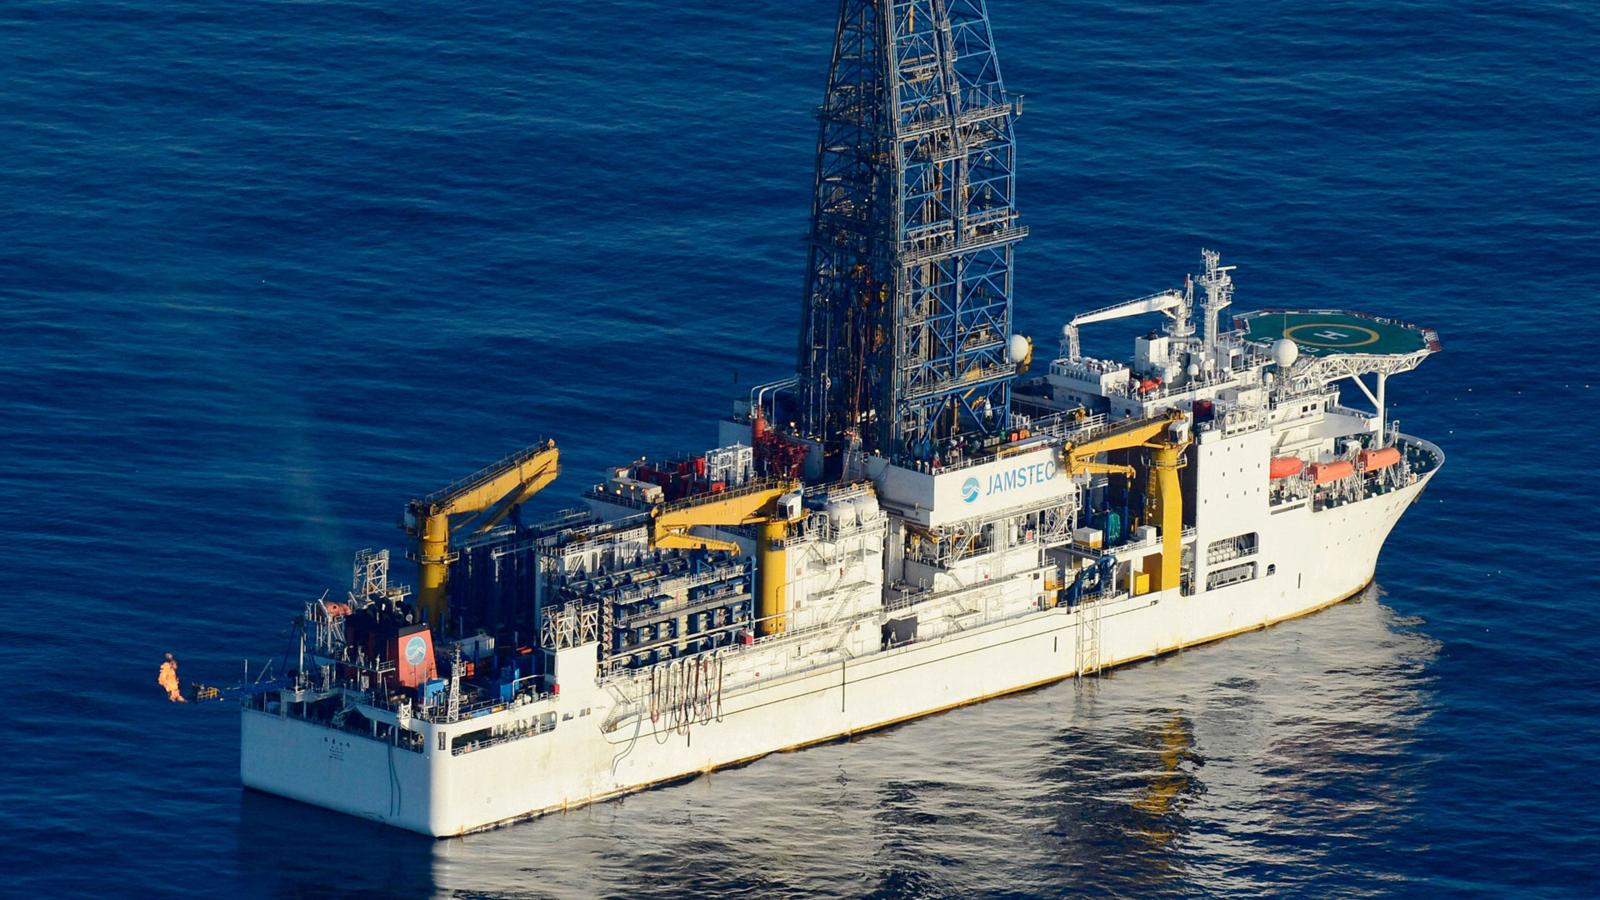 In 2013, the deep-sea drilling vessel Chikyu succeeded in extracting methane hydrate from the waters around central Japan (Credit: Getty Images)